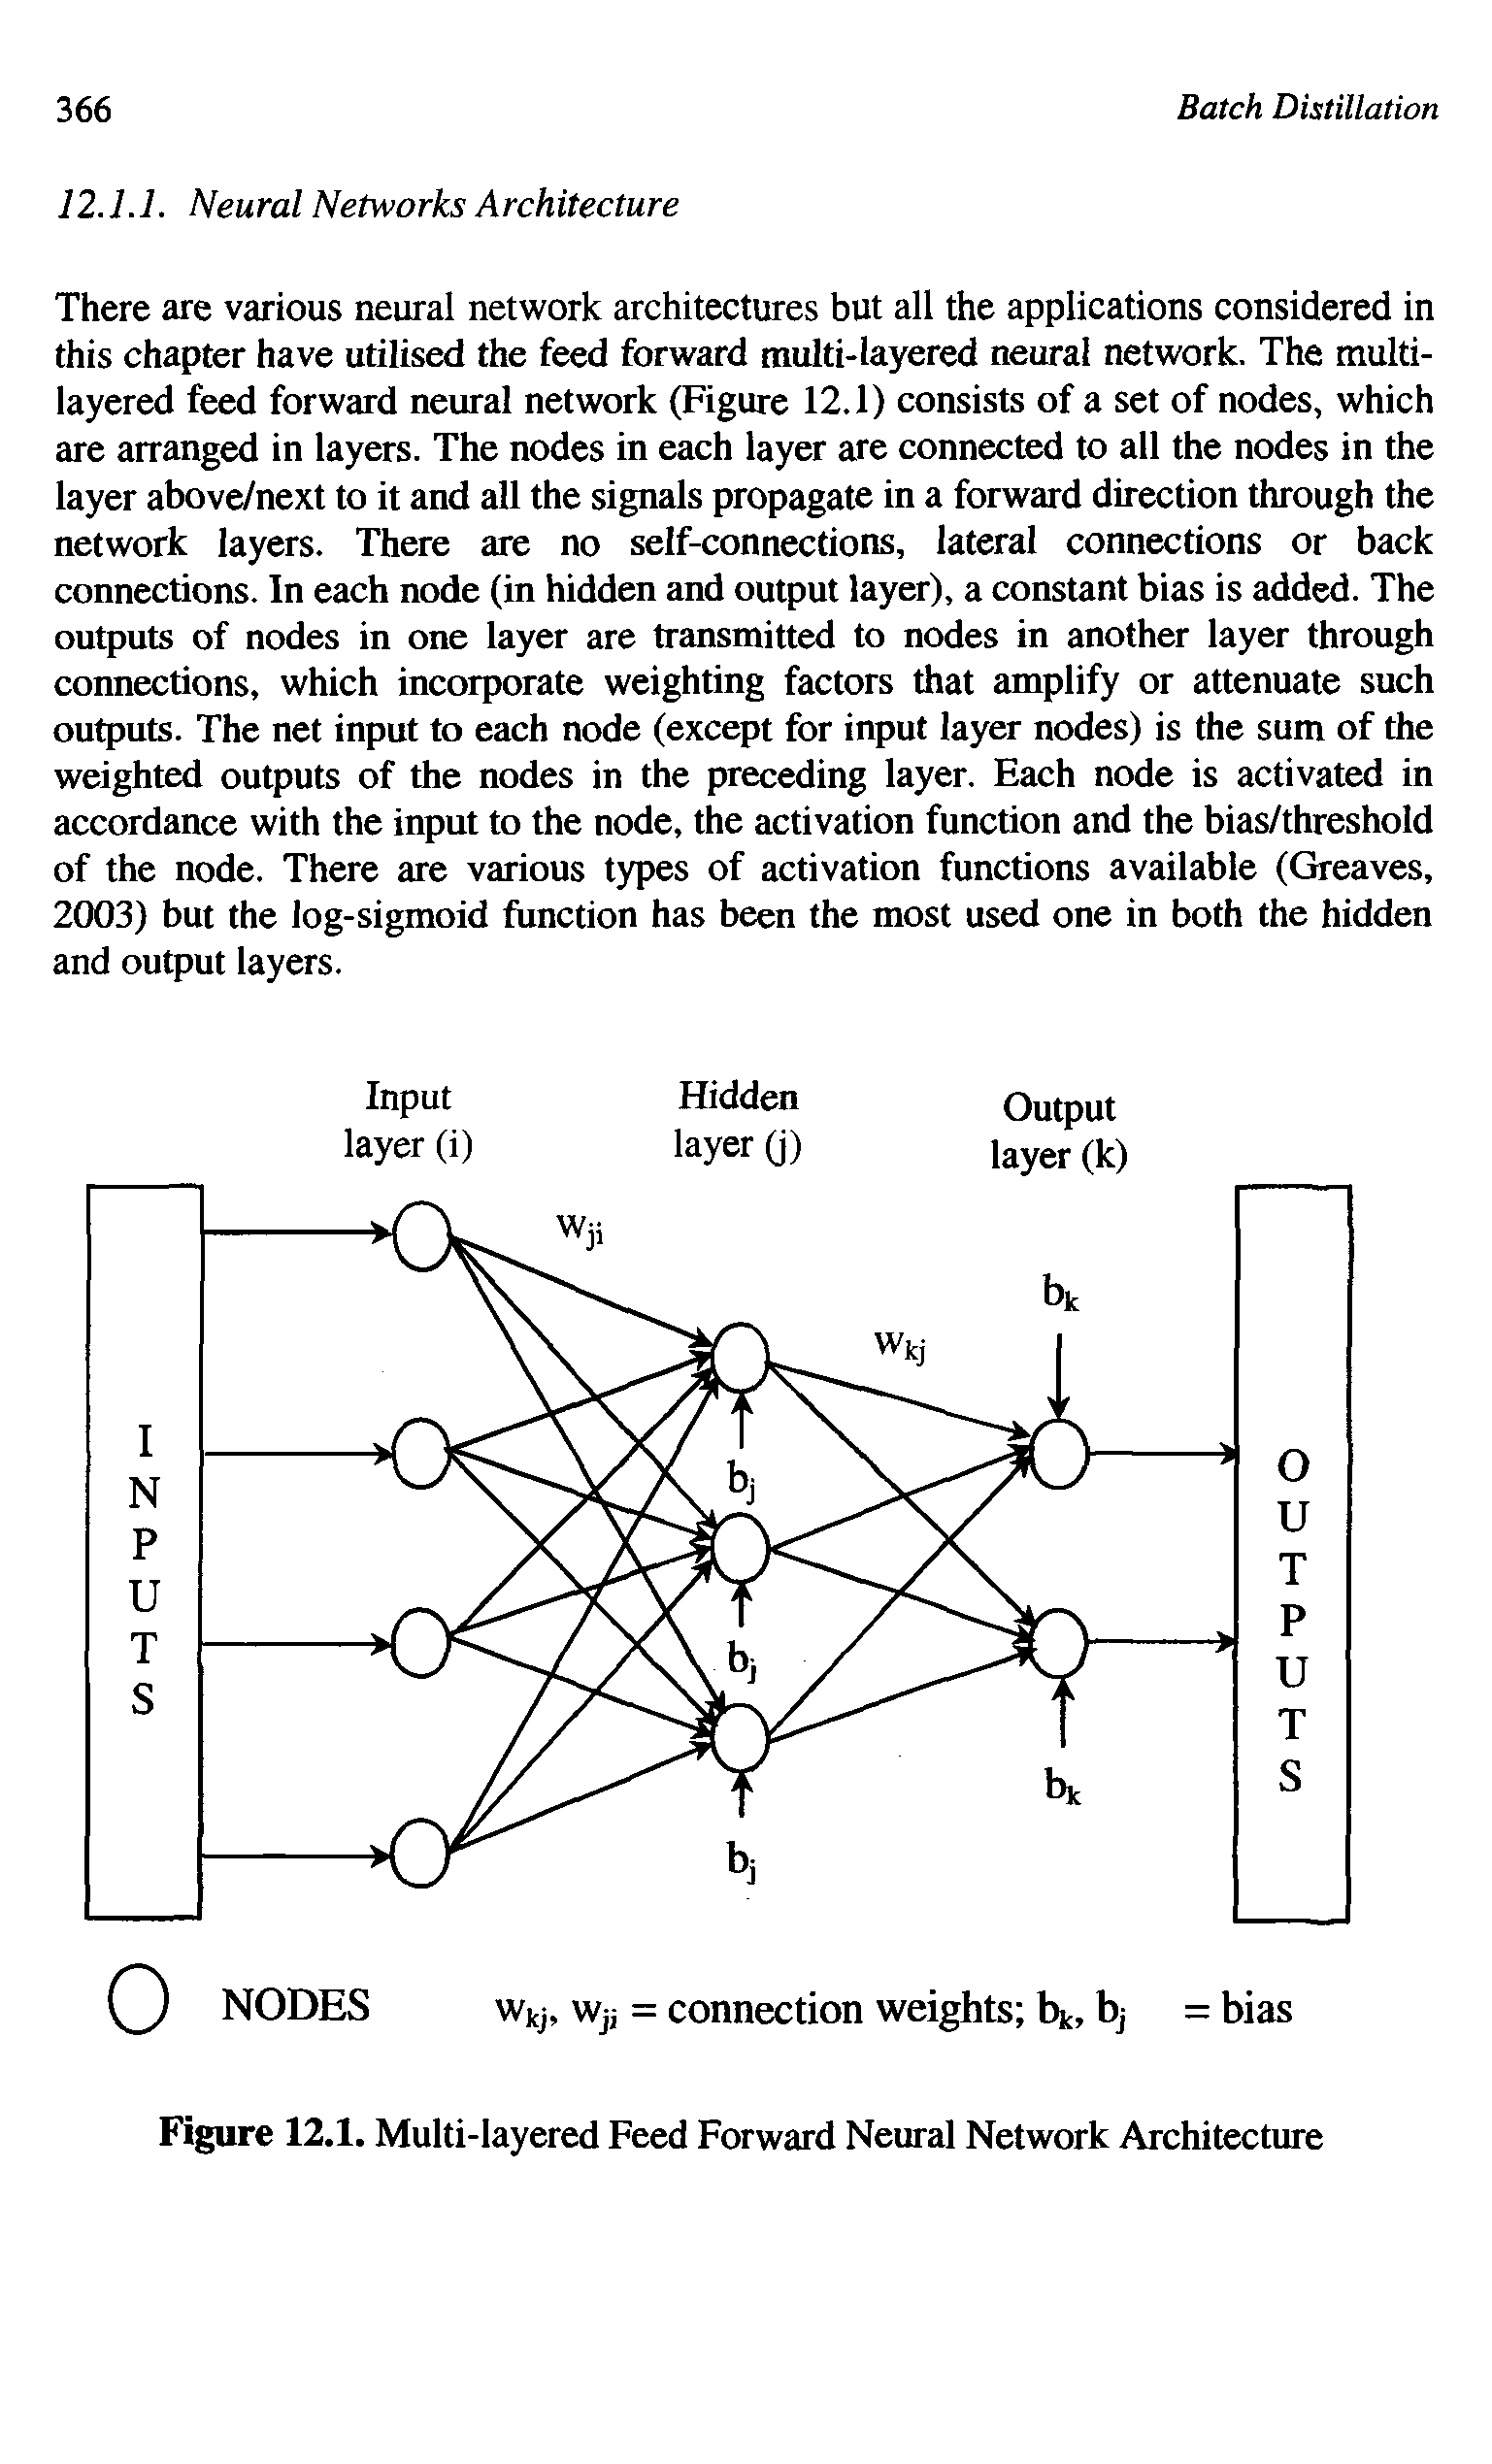 Figure 12.1. Multi-layered Feed Forward Neural Network Architecture...